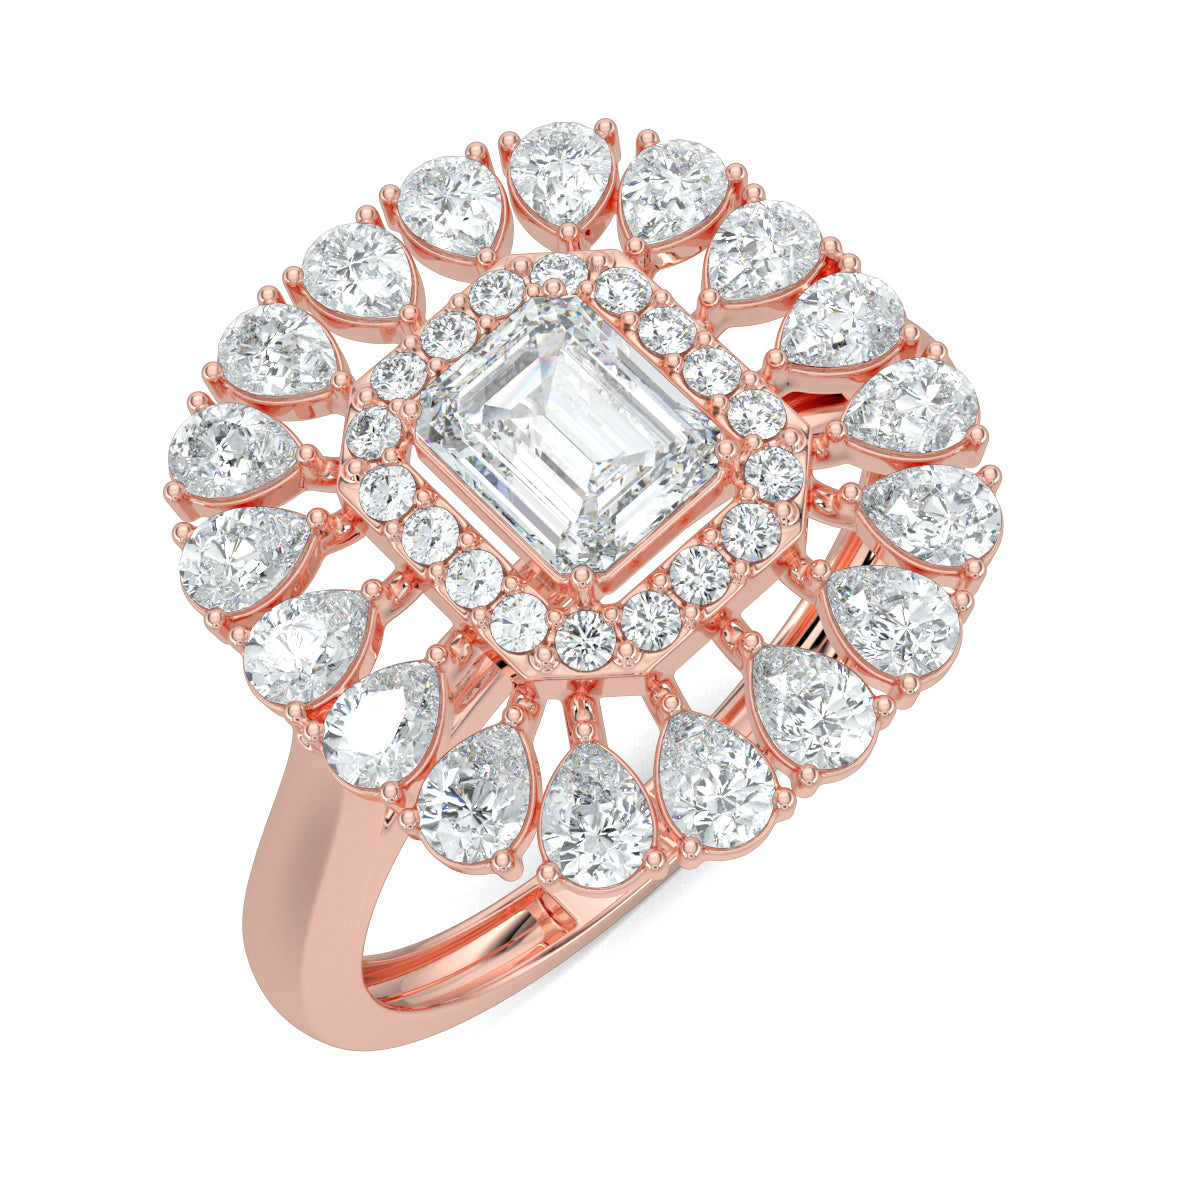 Rose Gold, Diamond Ring, natural diamond ring, lab-grown diamond ring, exquisite diamond ring, emerald shape diamond, round diamond border, pear-shaped diamond accents, elegant jewelry, statement ring, cocktail ring